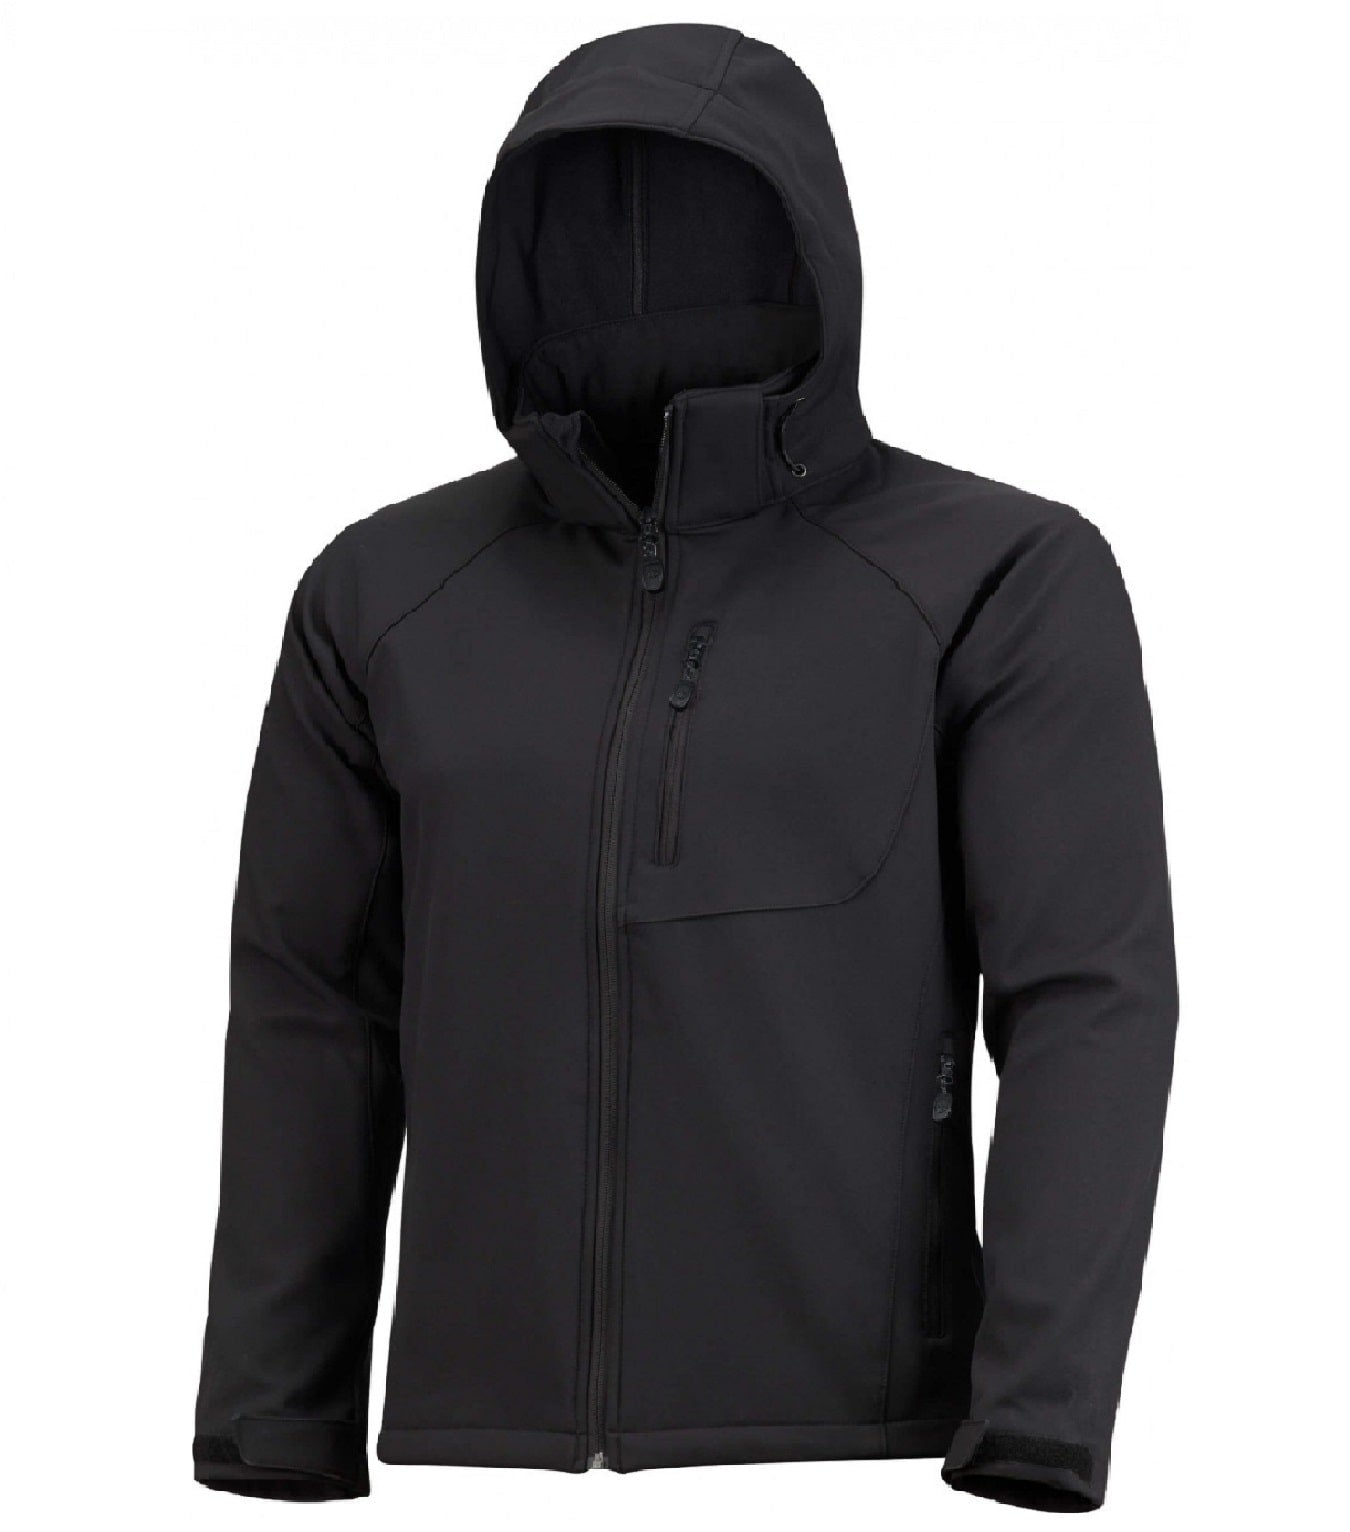 Mens' Warm Water Repellent Softshell Snowboard Jacket- Removable Hood